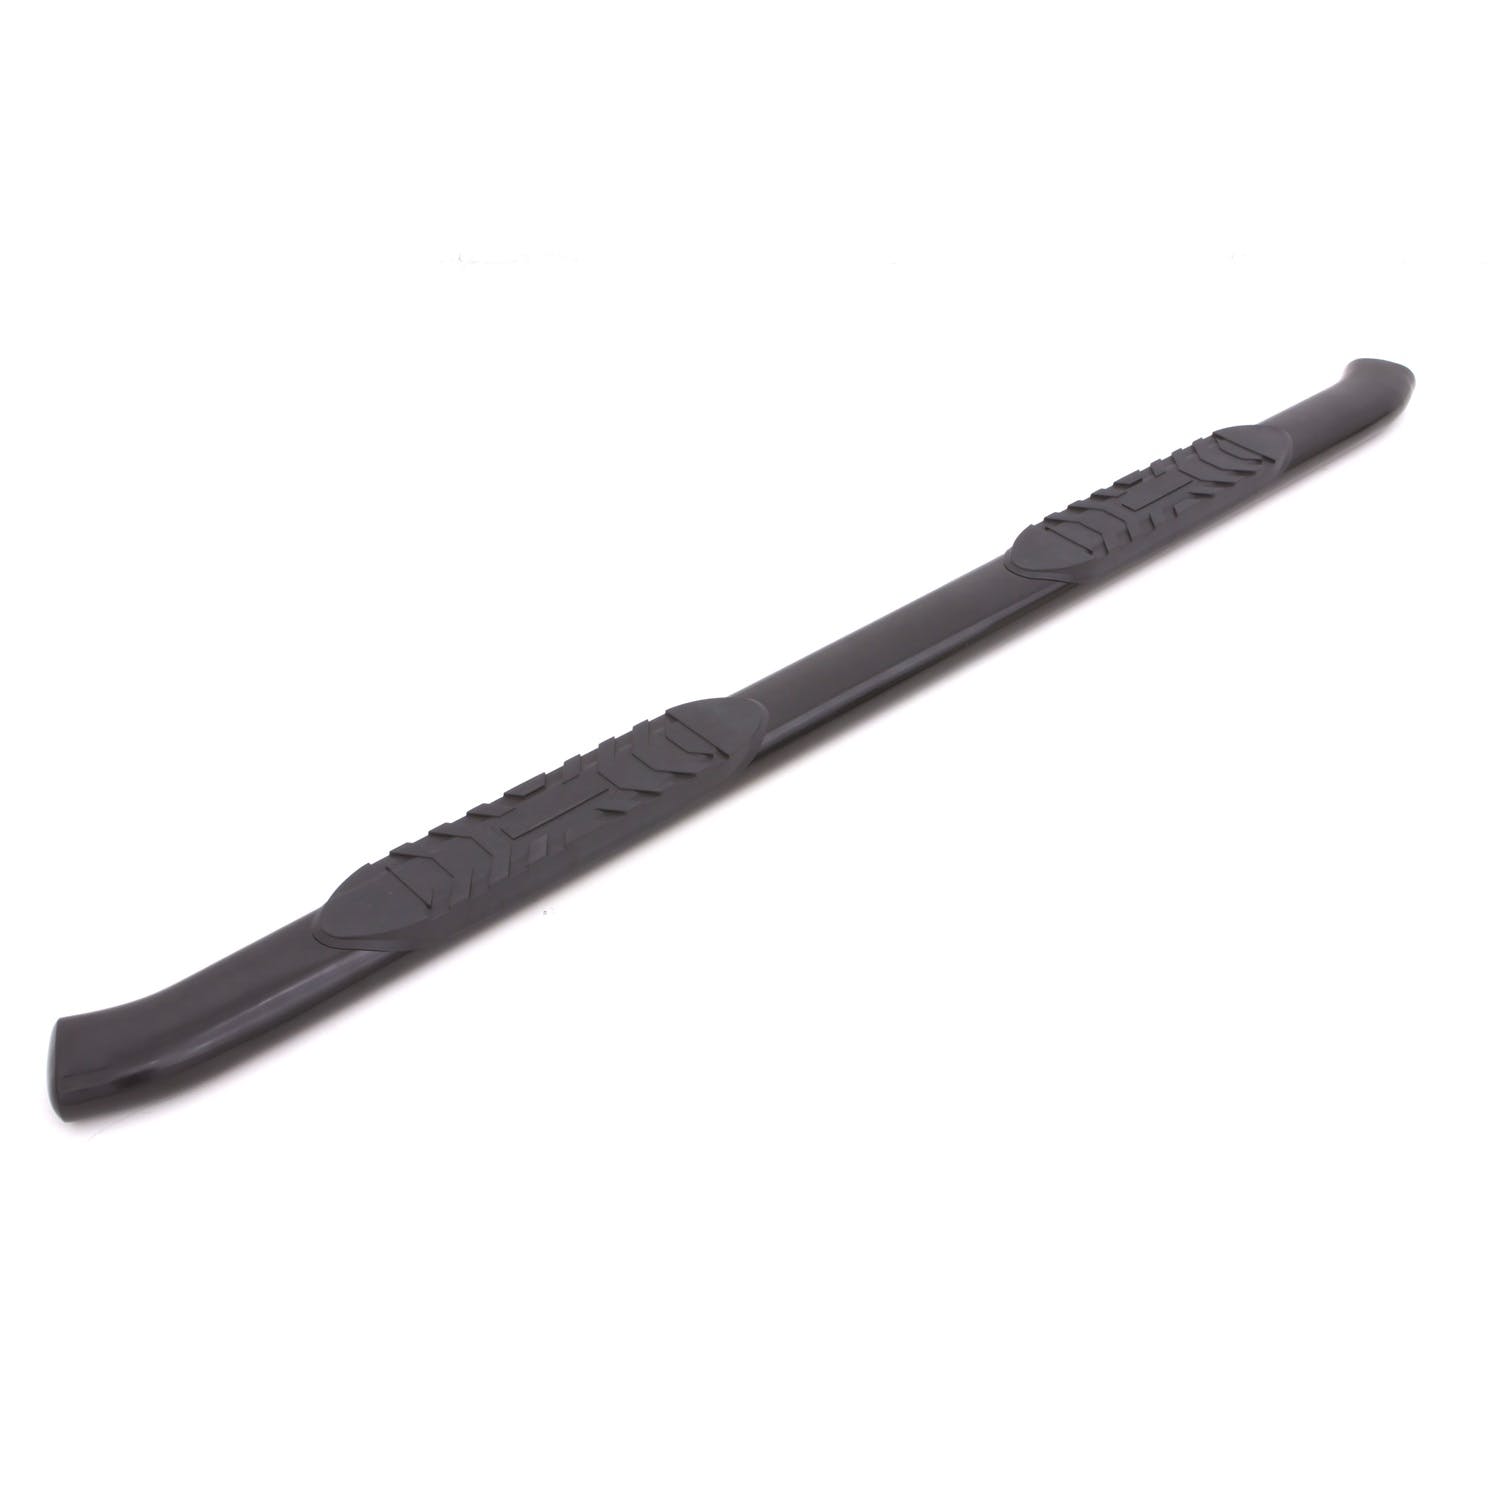 LUND 23851007 5 Inch Oval Curved Nerf Bar - Black 5 In OVAL CURVED STEEL